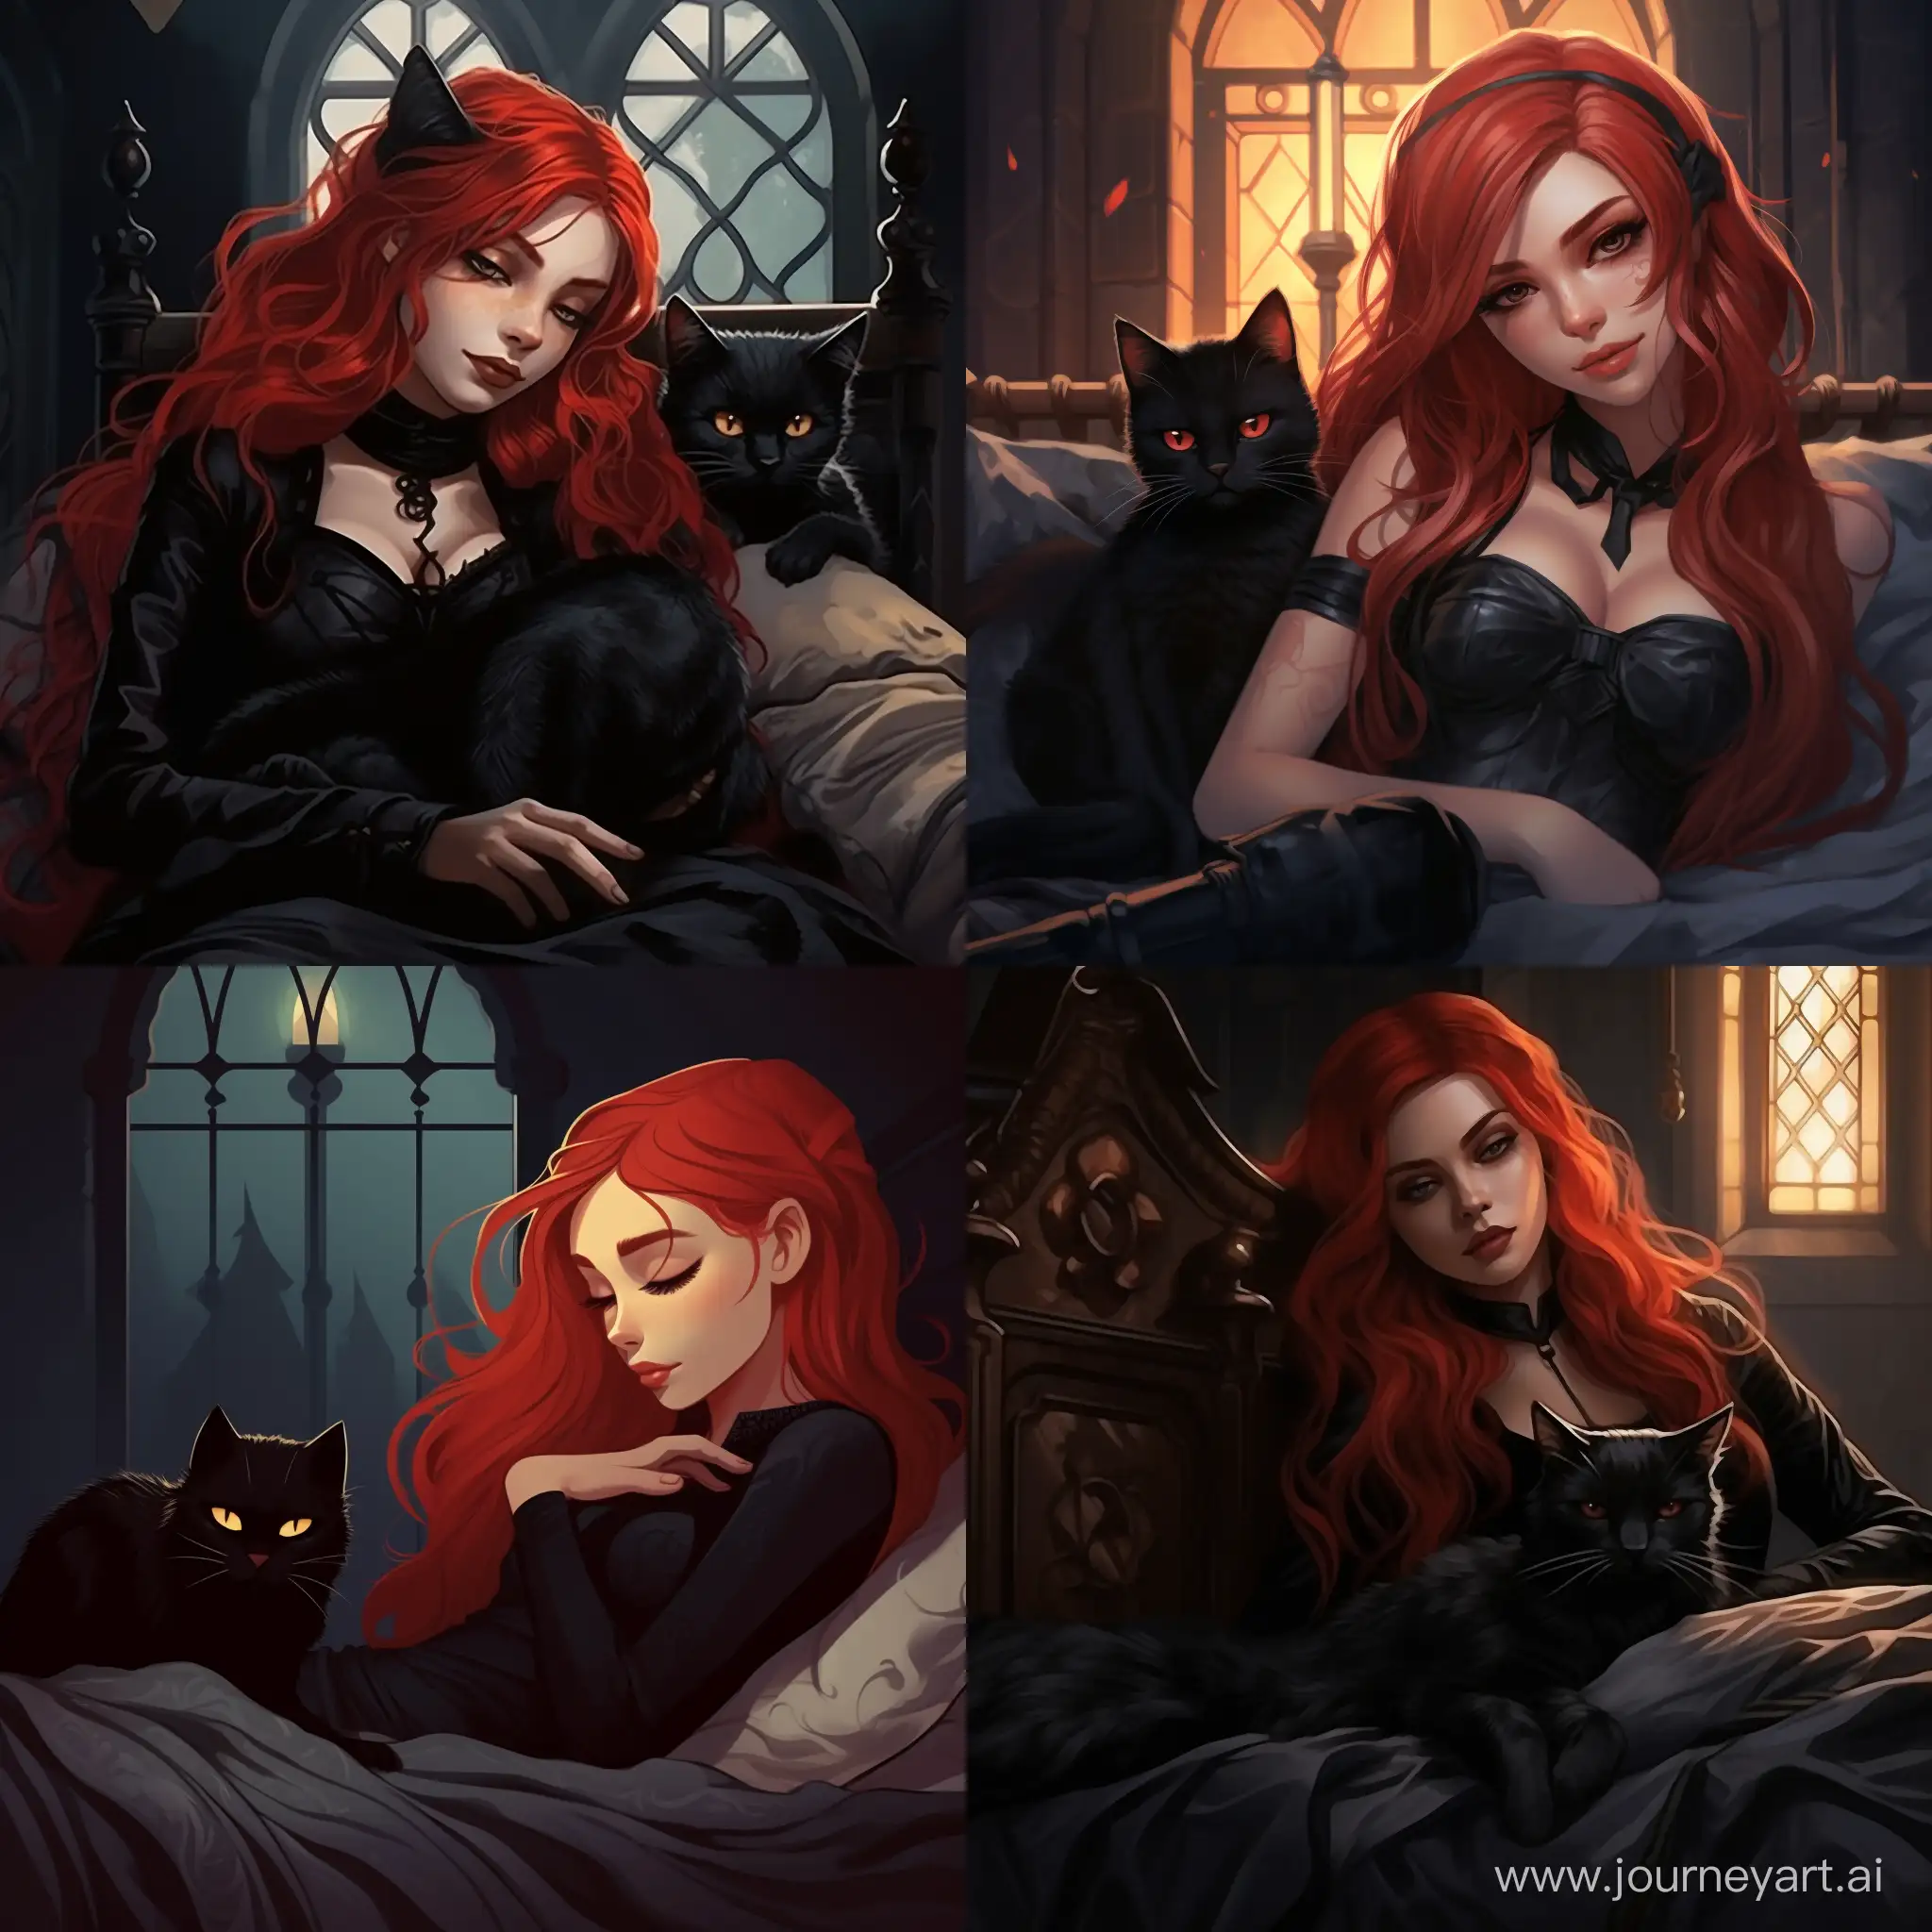 Surreal-Gothic-Dream-RedHaired-Girl-Sleeping-with-GothicStyle-Cat